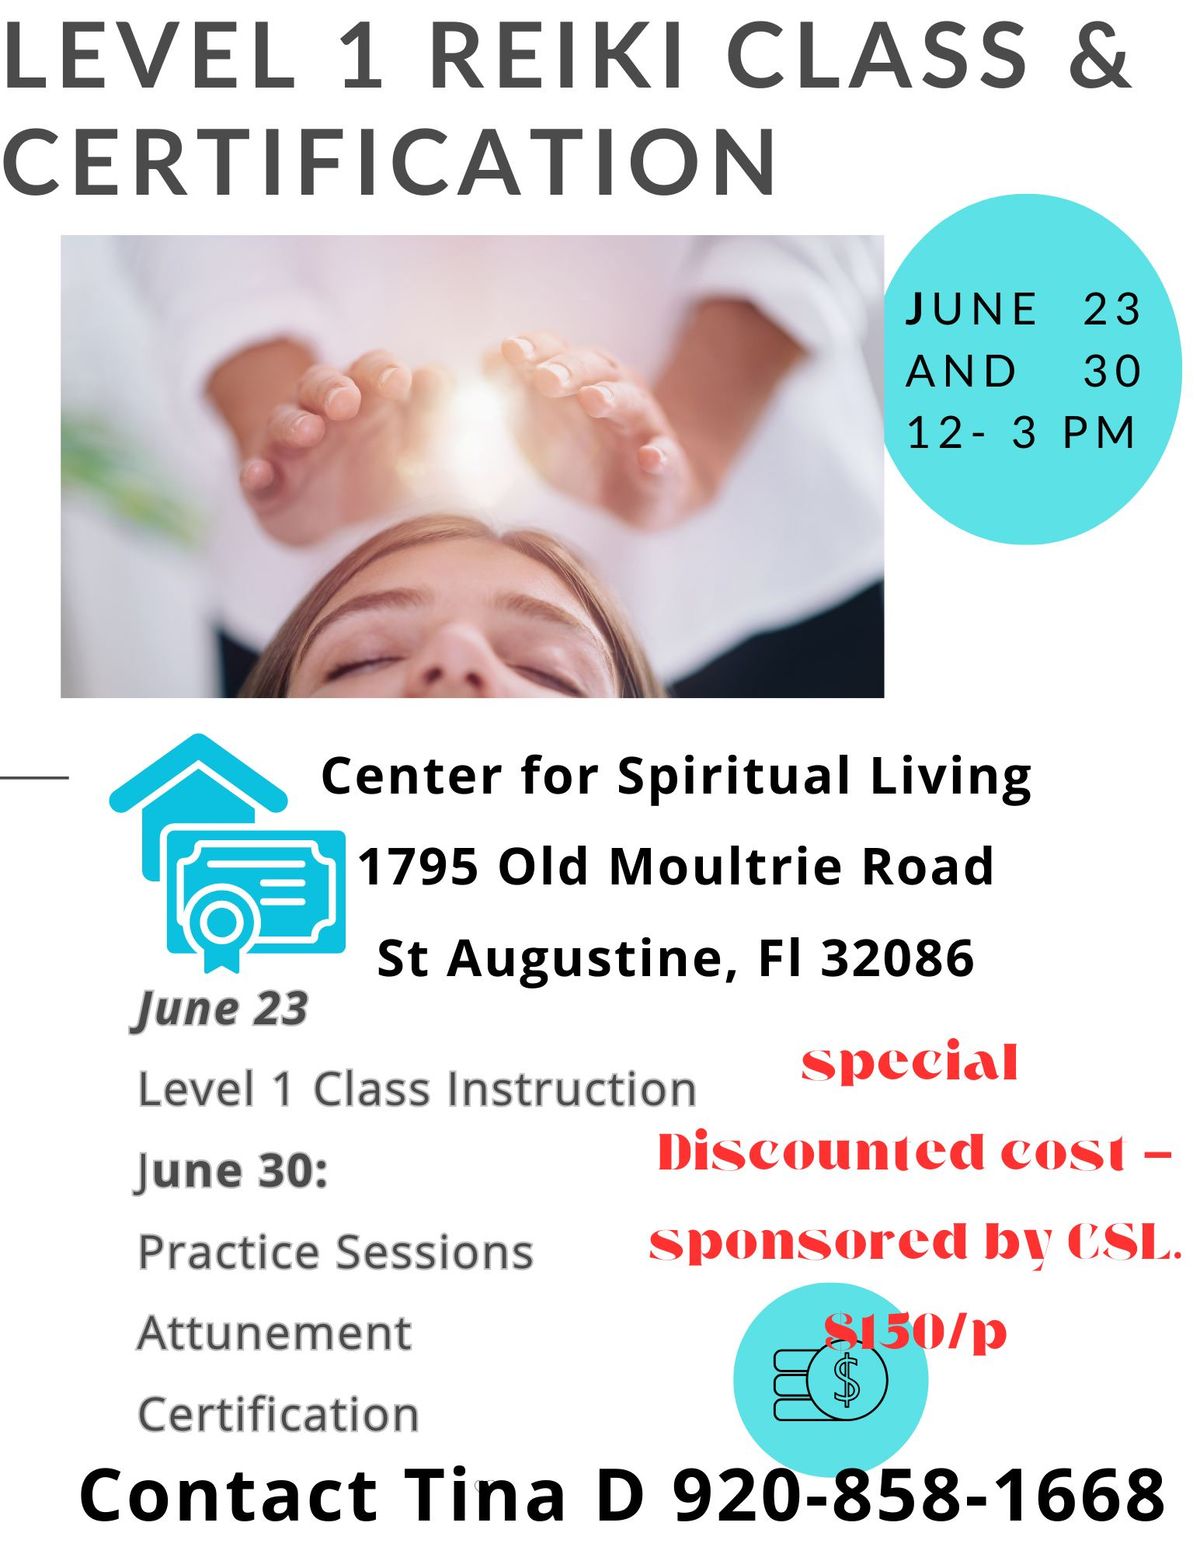 Reiki Level 1 Class and Certification